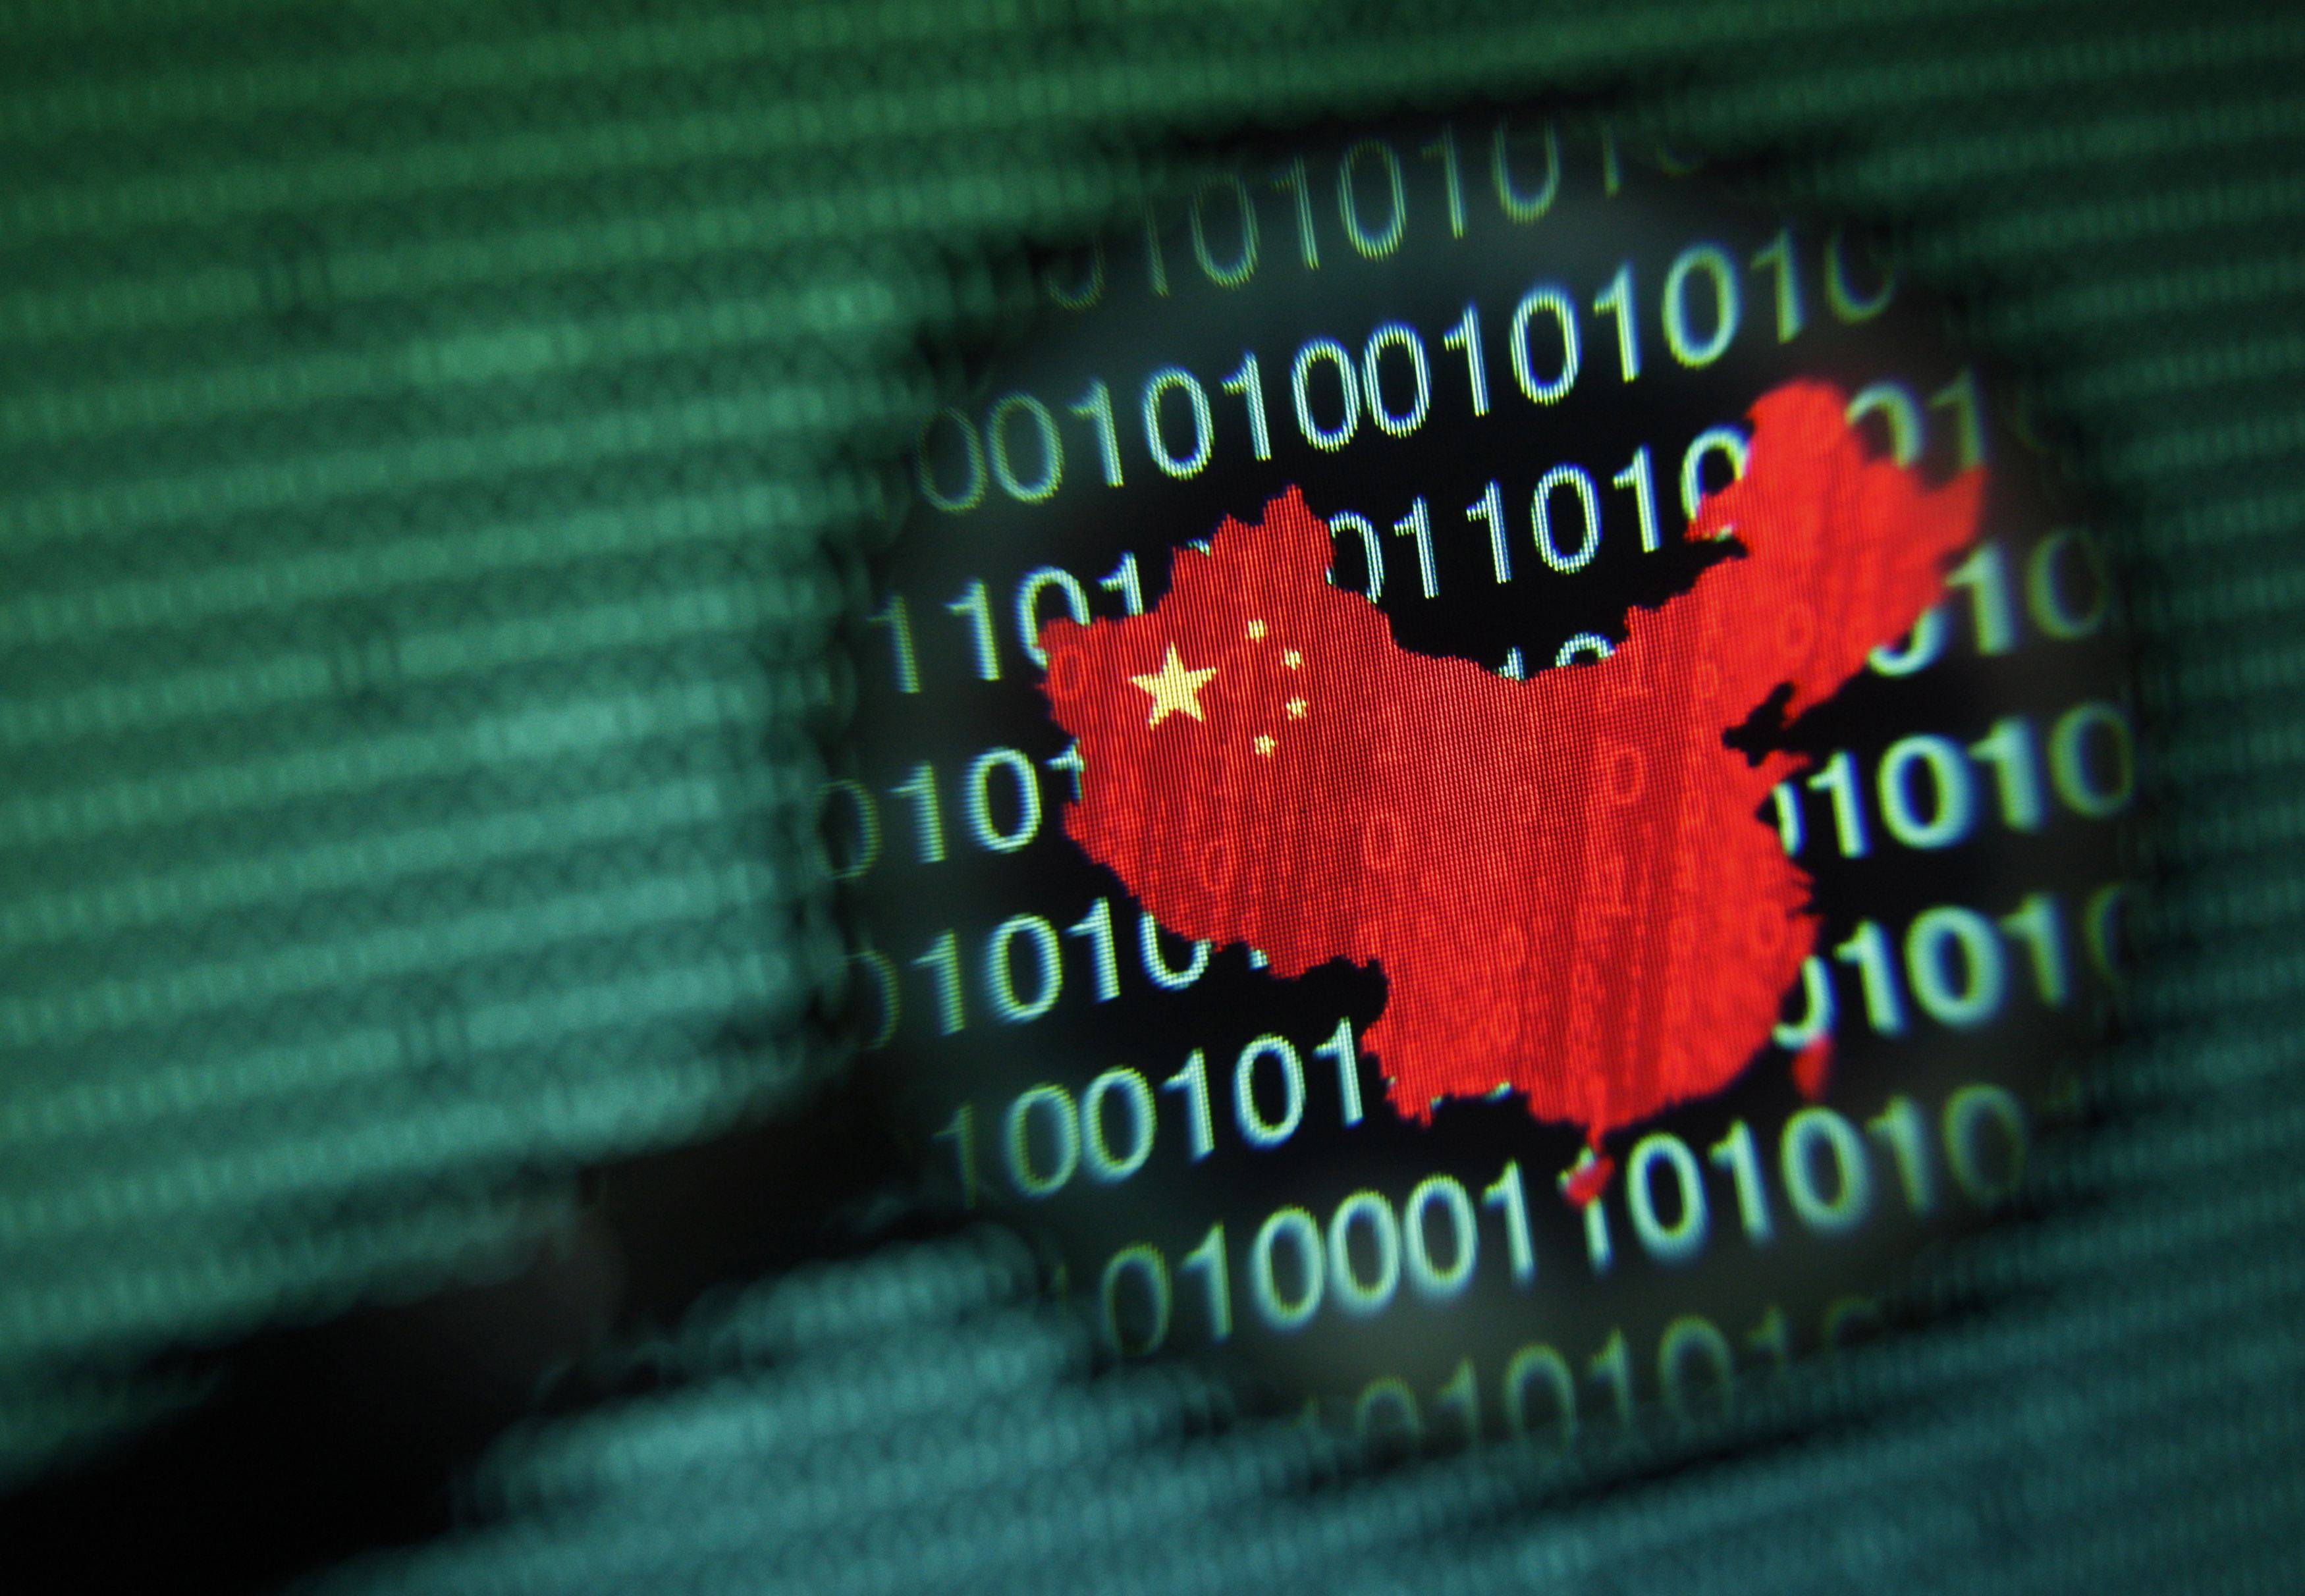 Chinese state security authorities say hackers have been using phishing emails, targeting software loopholes and injecting code to gain access to devices.  Photo: Reuters